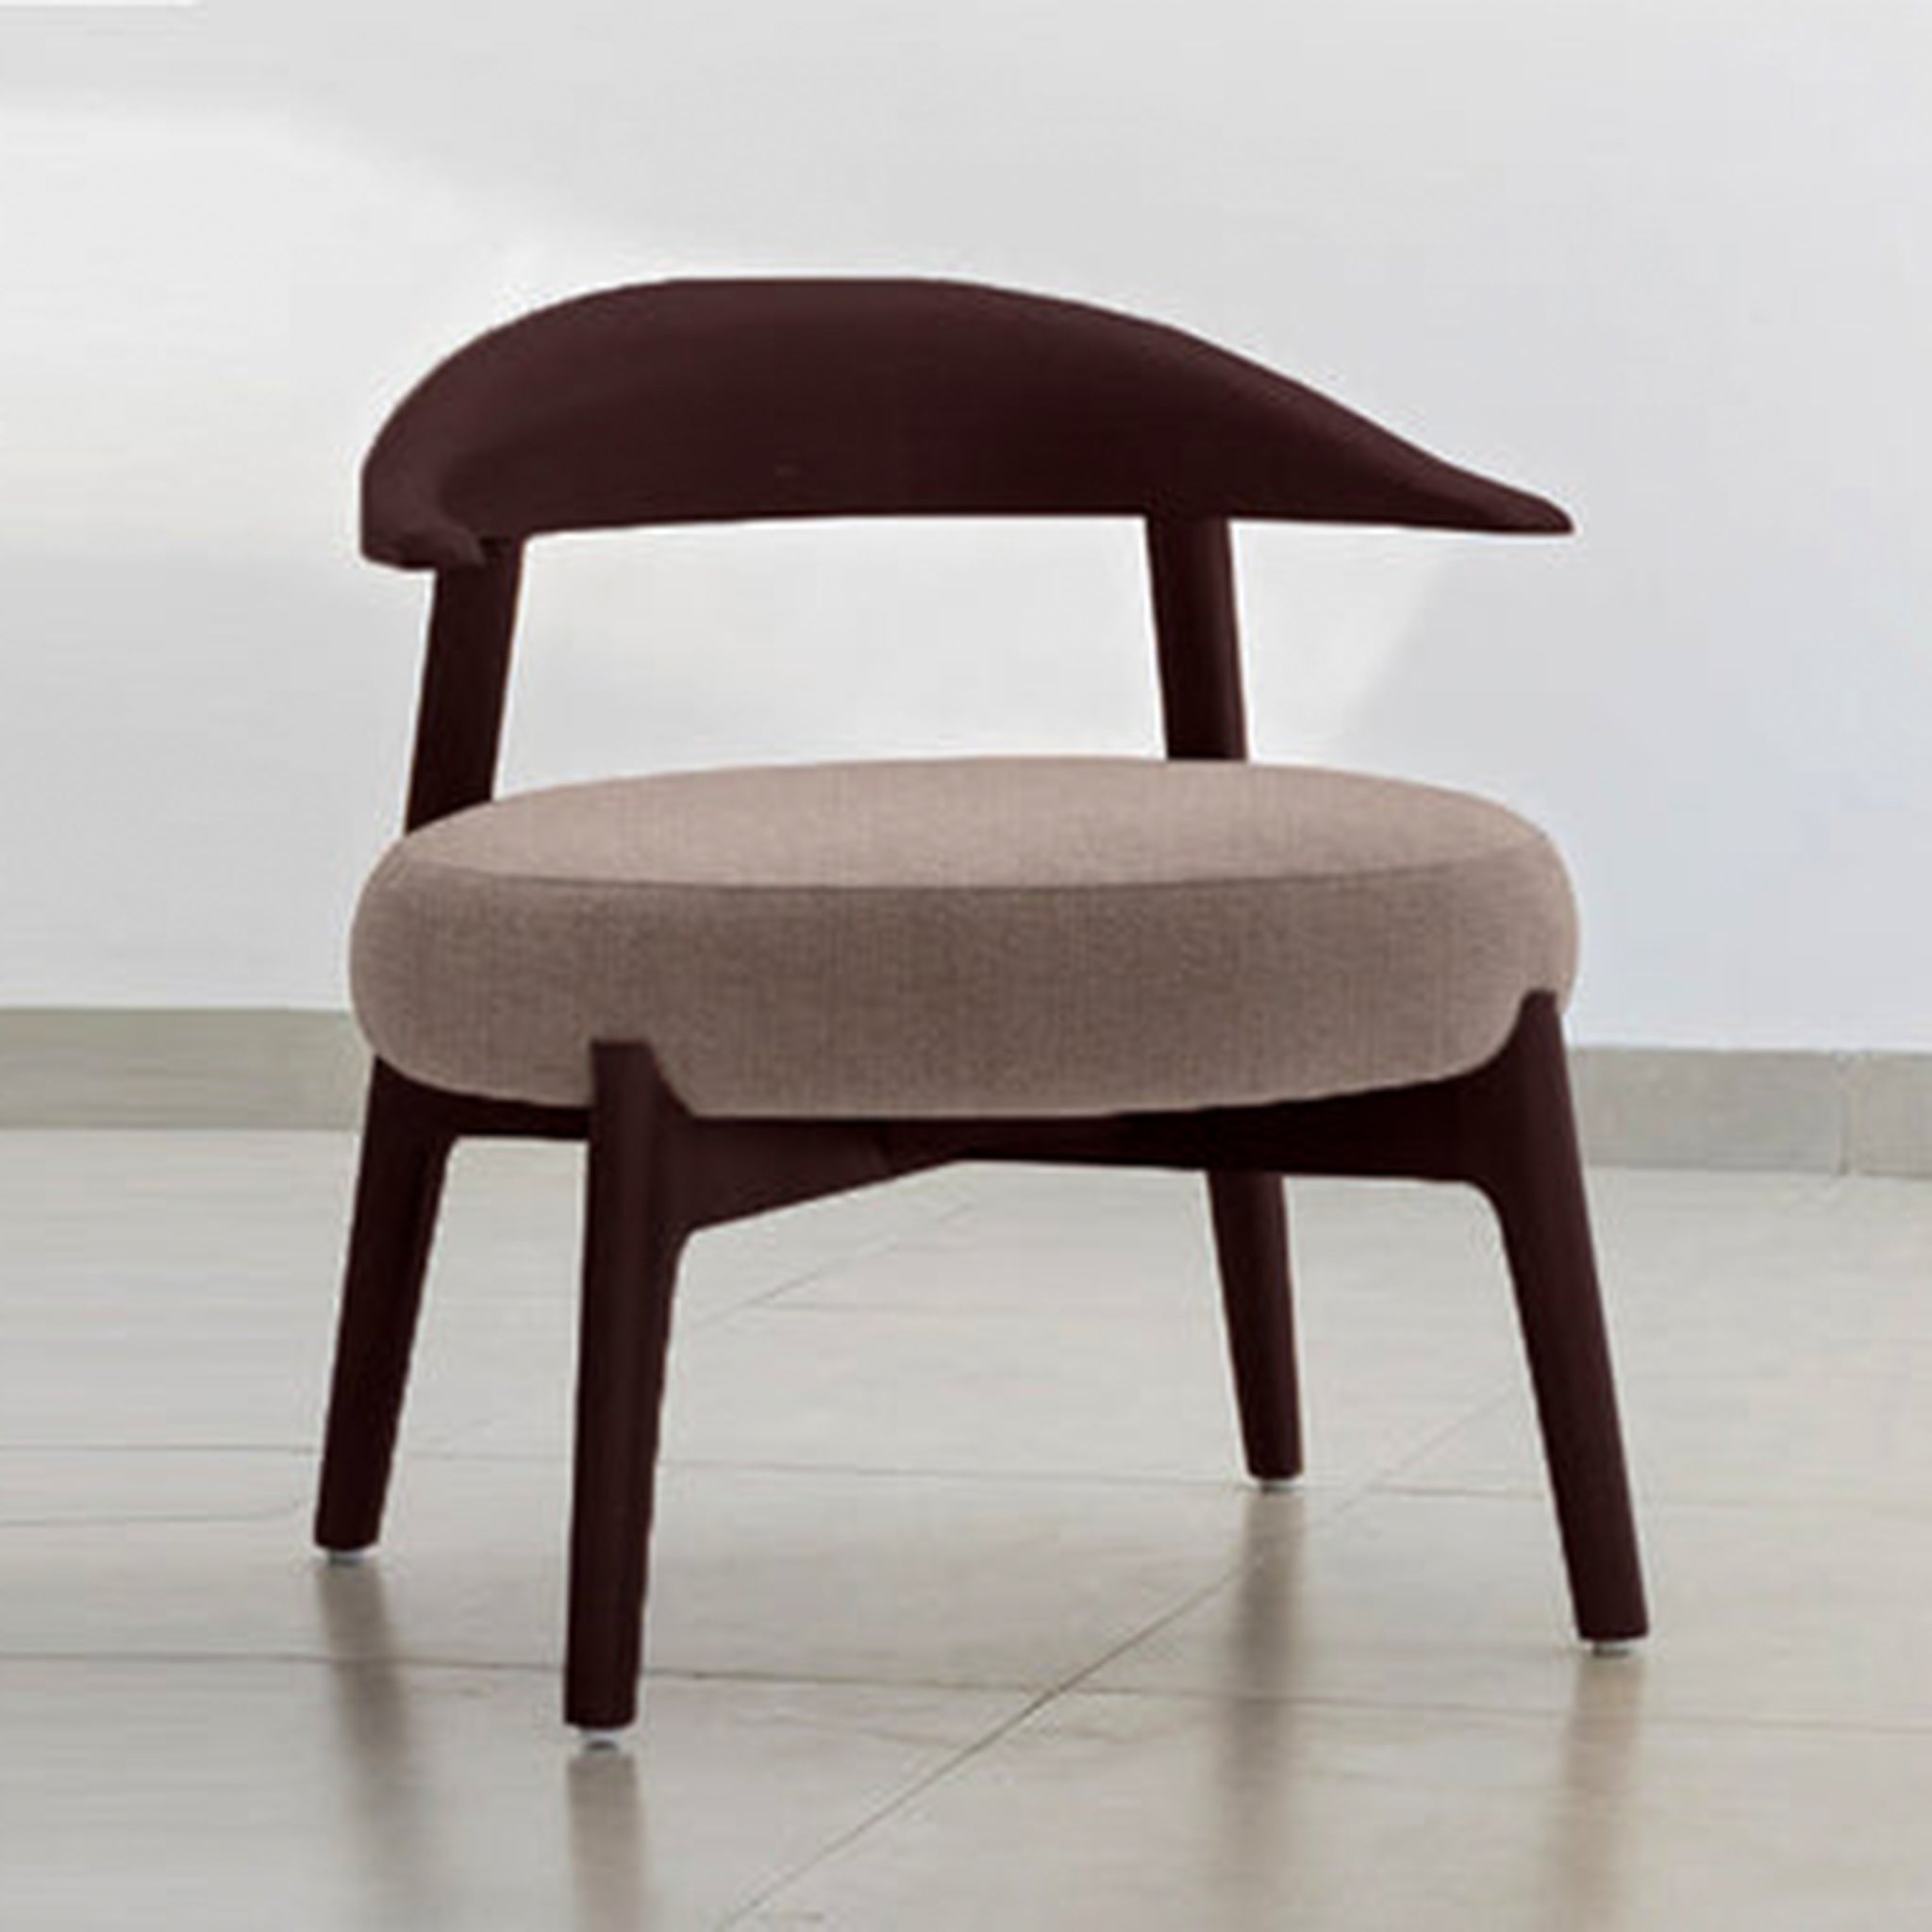 "The Hyde Accent Chair with its unique wooden curves and soft seat"